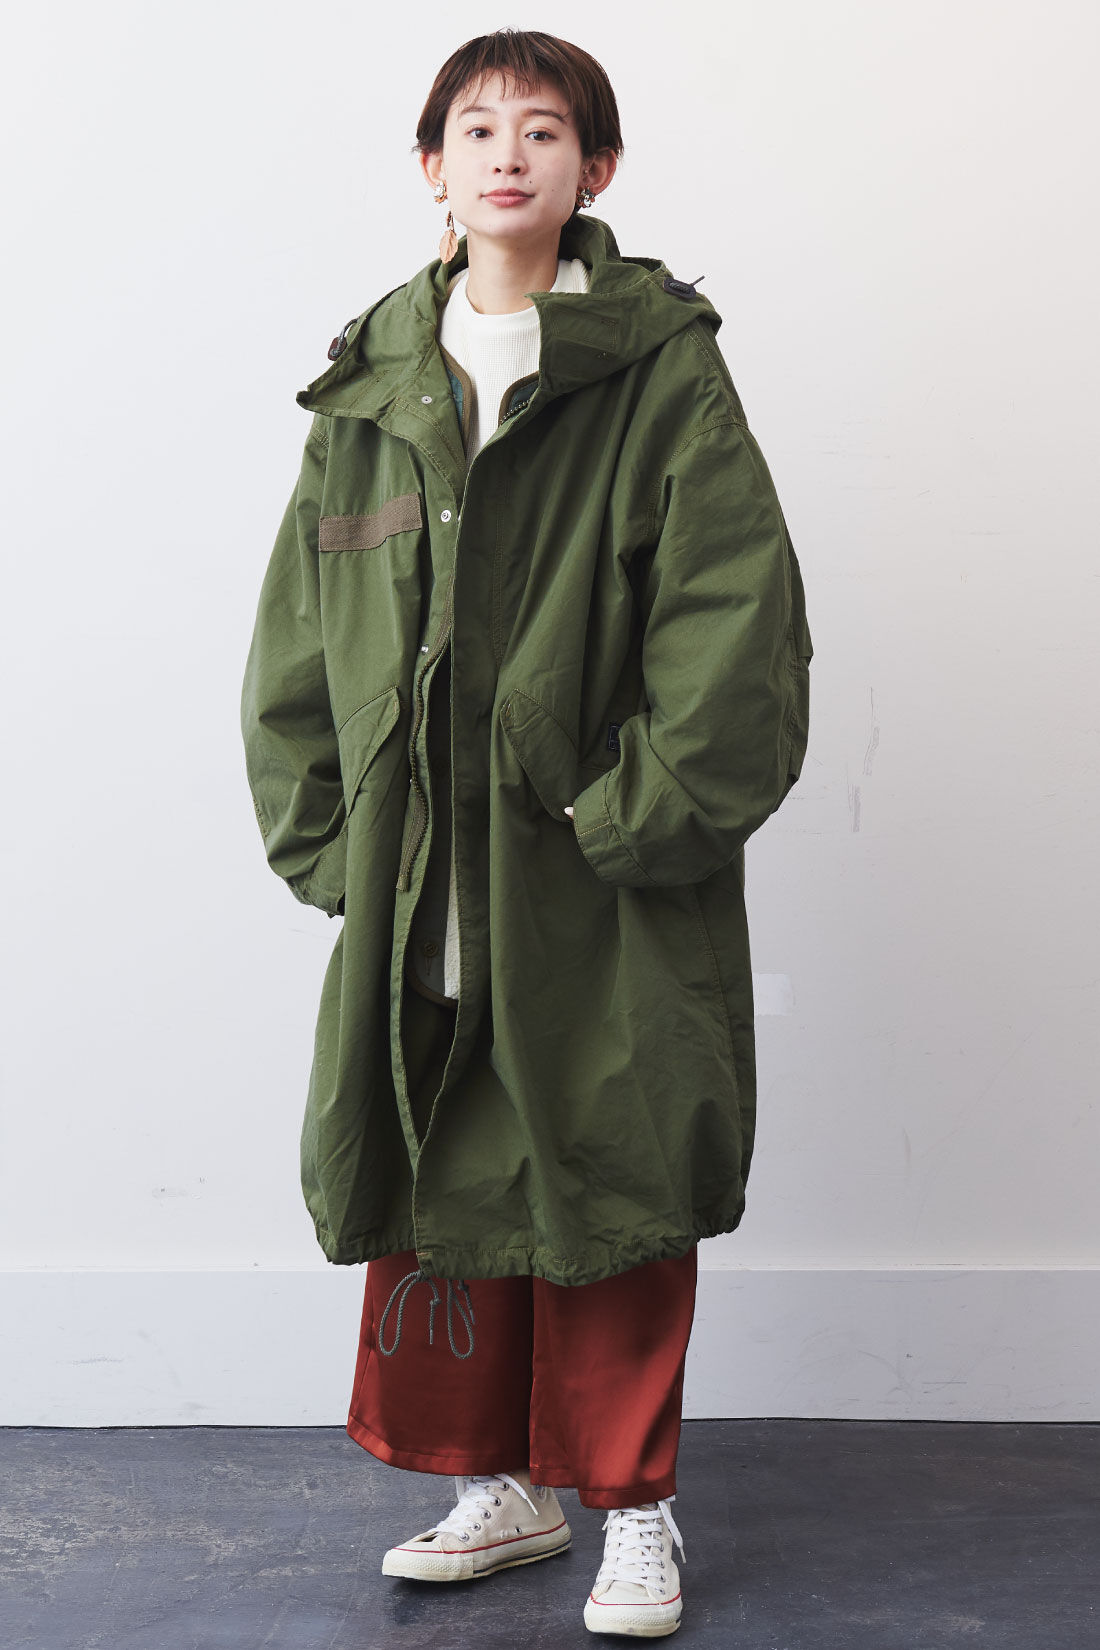 Real Stock|MEDE19F 〈SELECT〉 Lee MILITARY FISHTAIL PARKA〈KHAKI〉|モデル身長：164cm　着用サイズ：M